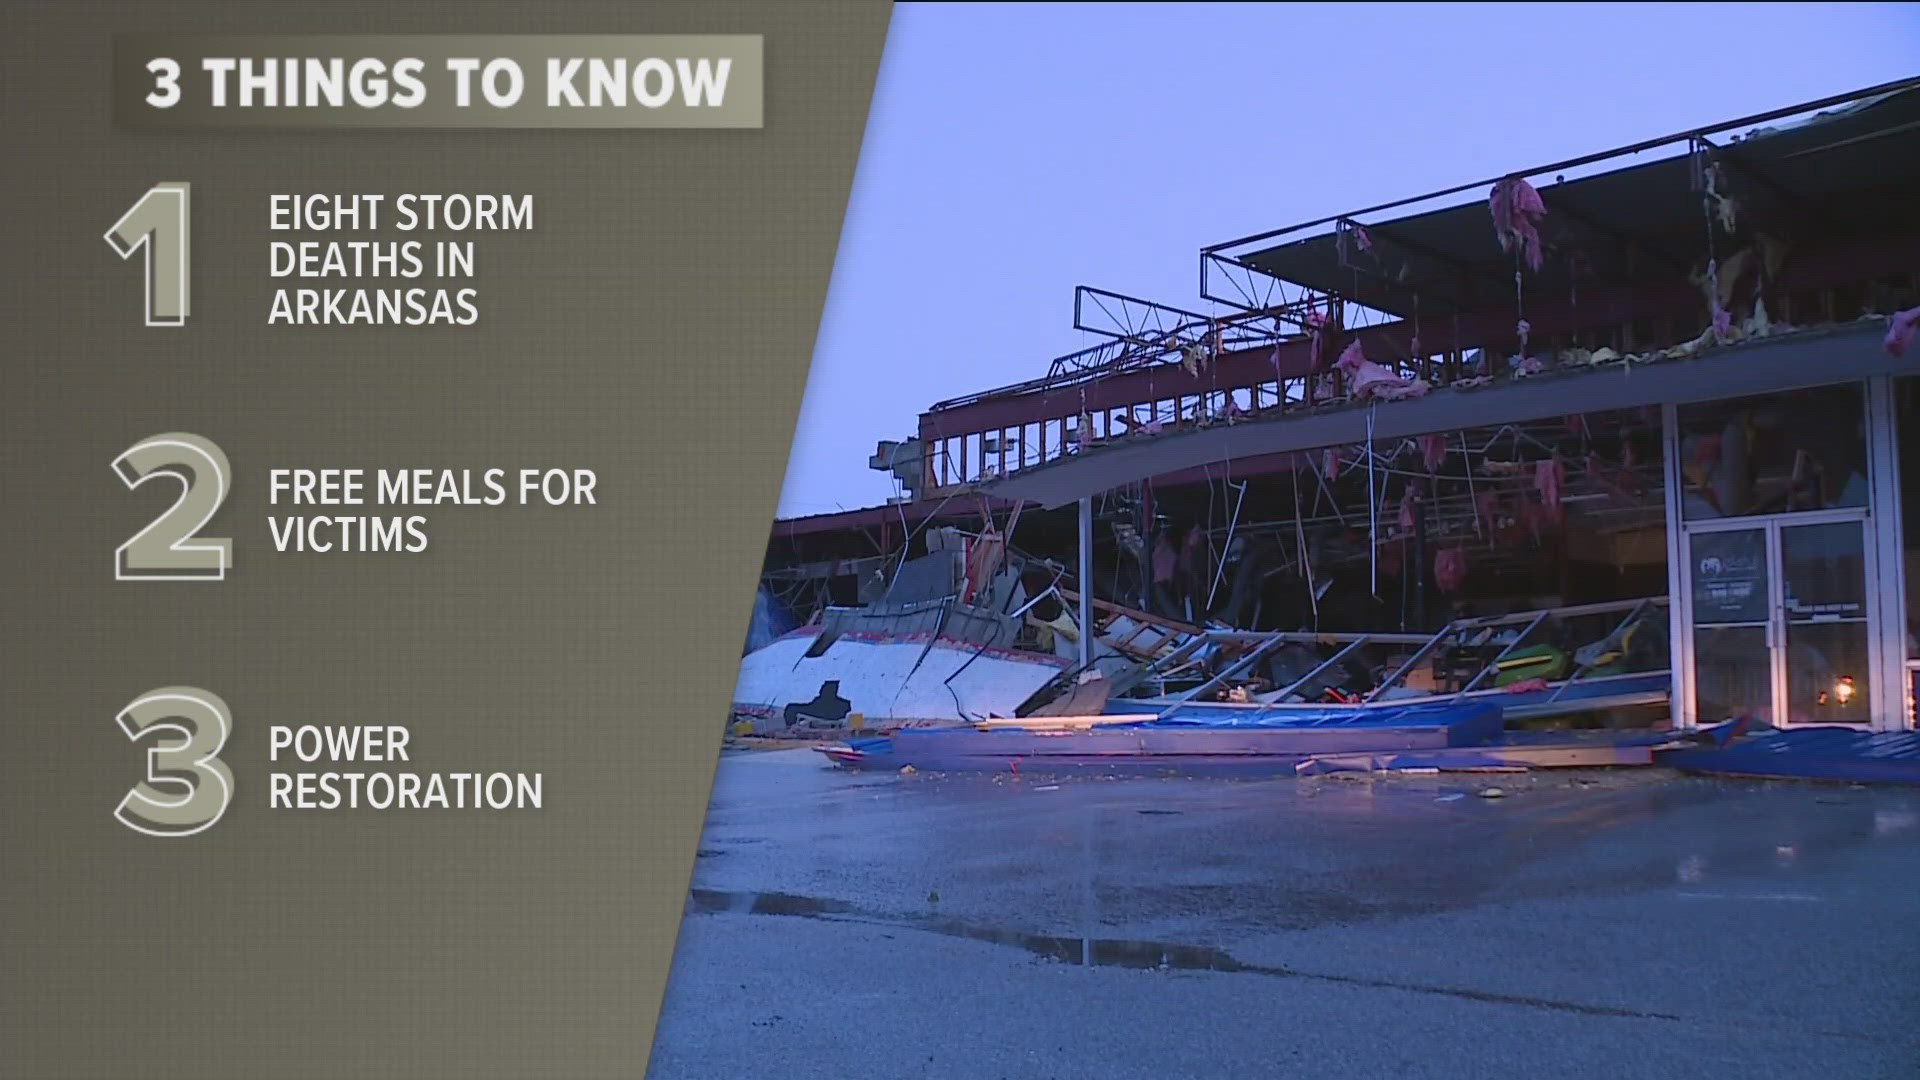 The National Weather Service is releasing new info about the preliminary damage report covering the storms.